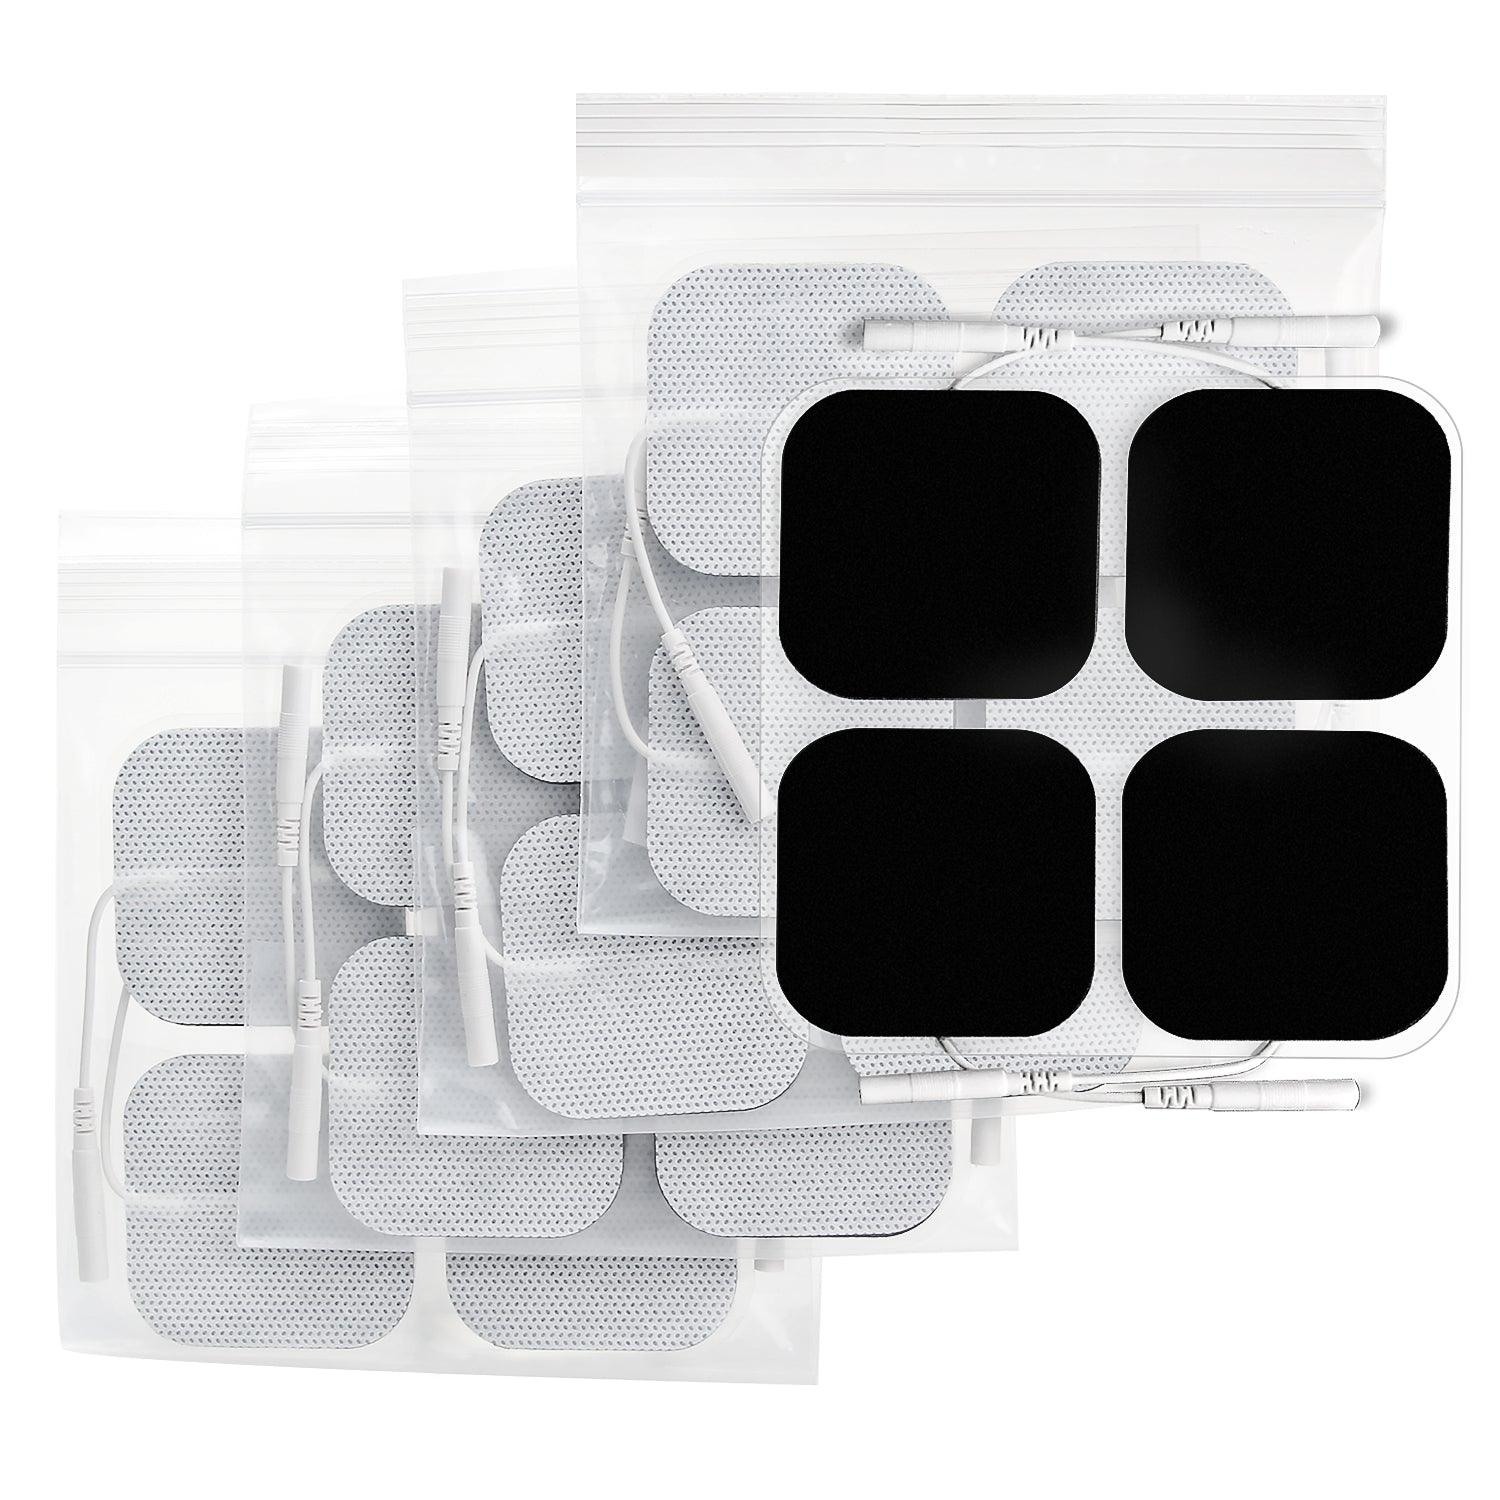 http://auvonhealth.com/cdn/shop/files/auvon-tens-unit-pads-2-x2-20-pcs-3rd-gen-latex-free-replacement-pads-electrode-patches-with-upgraded-self-stick-performance-and-non-irritating-design-for-electrotherapy-auvon-1.jpg?v=1686019675